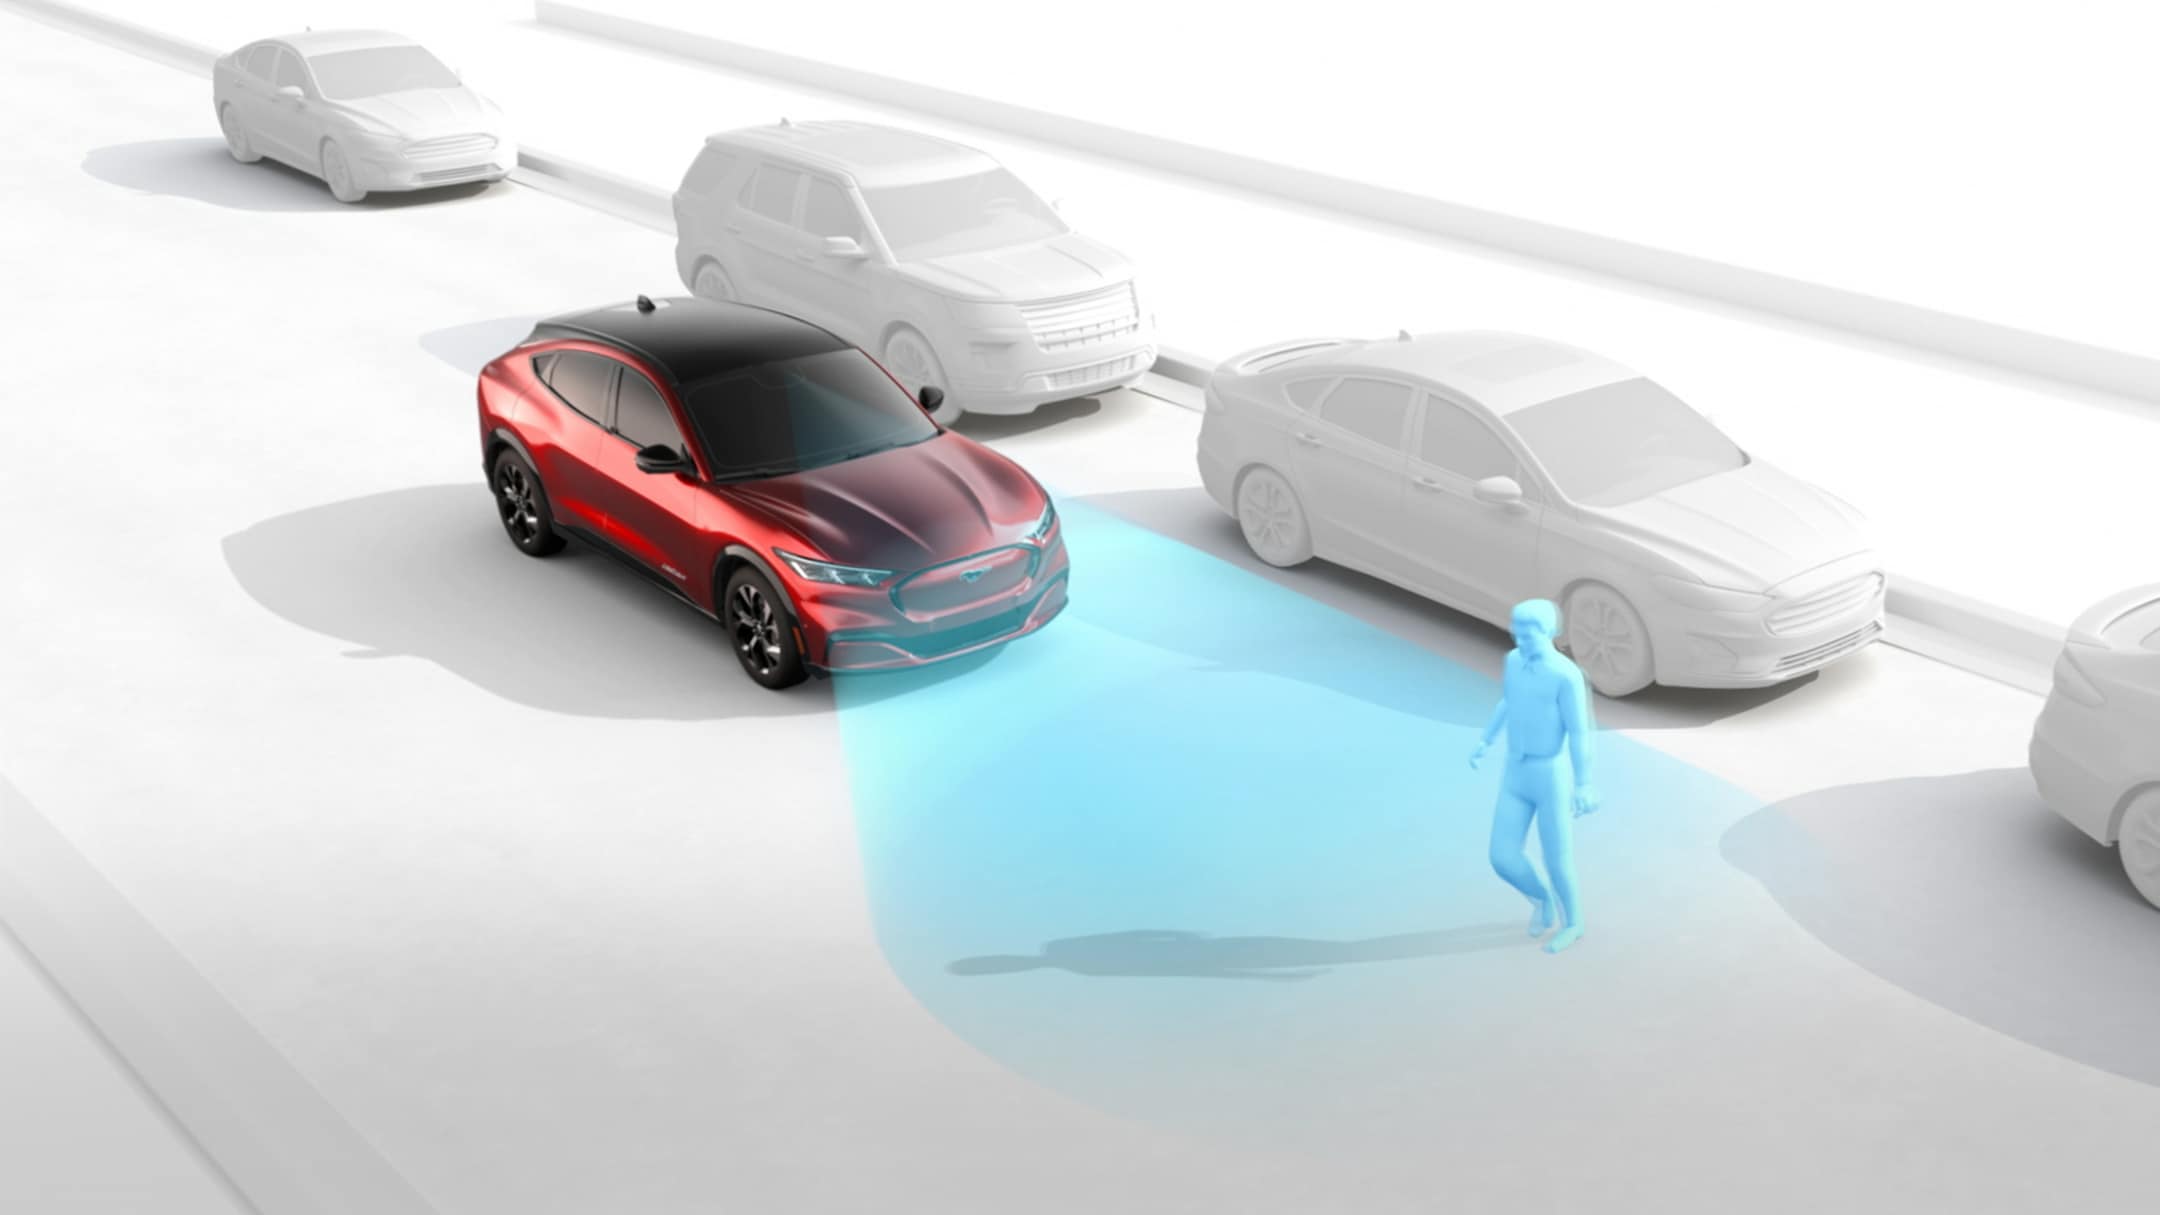 All-New Ford Mustang Mach-E detecting a pedestrian with the Pre-Collision Assist feature